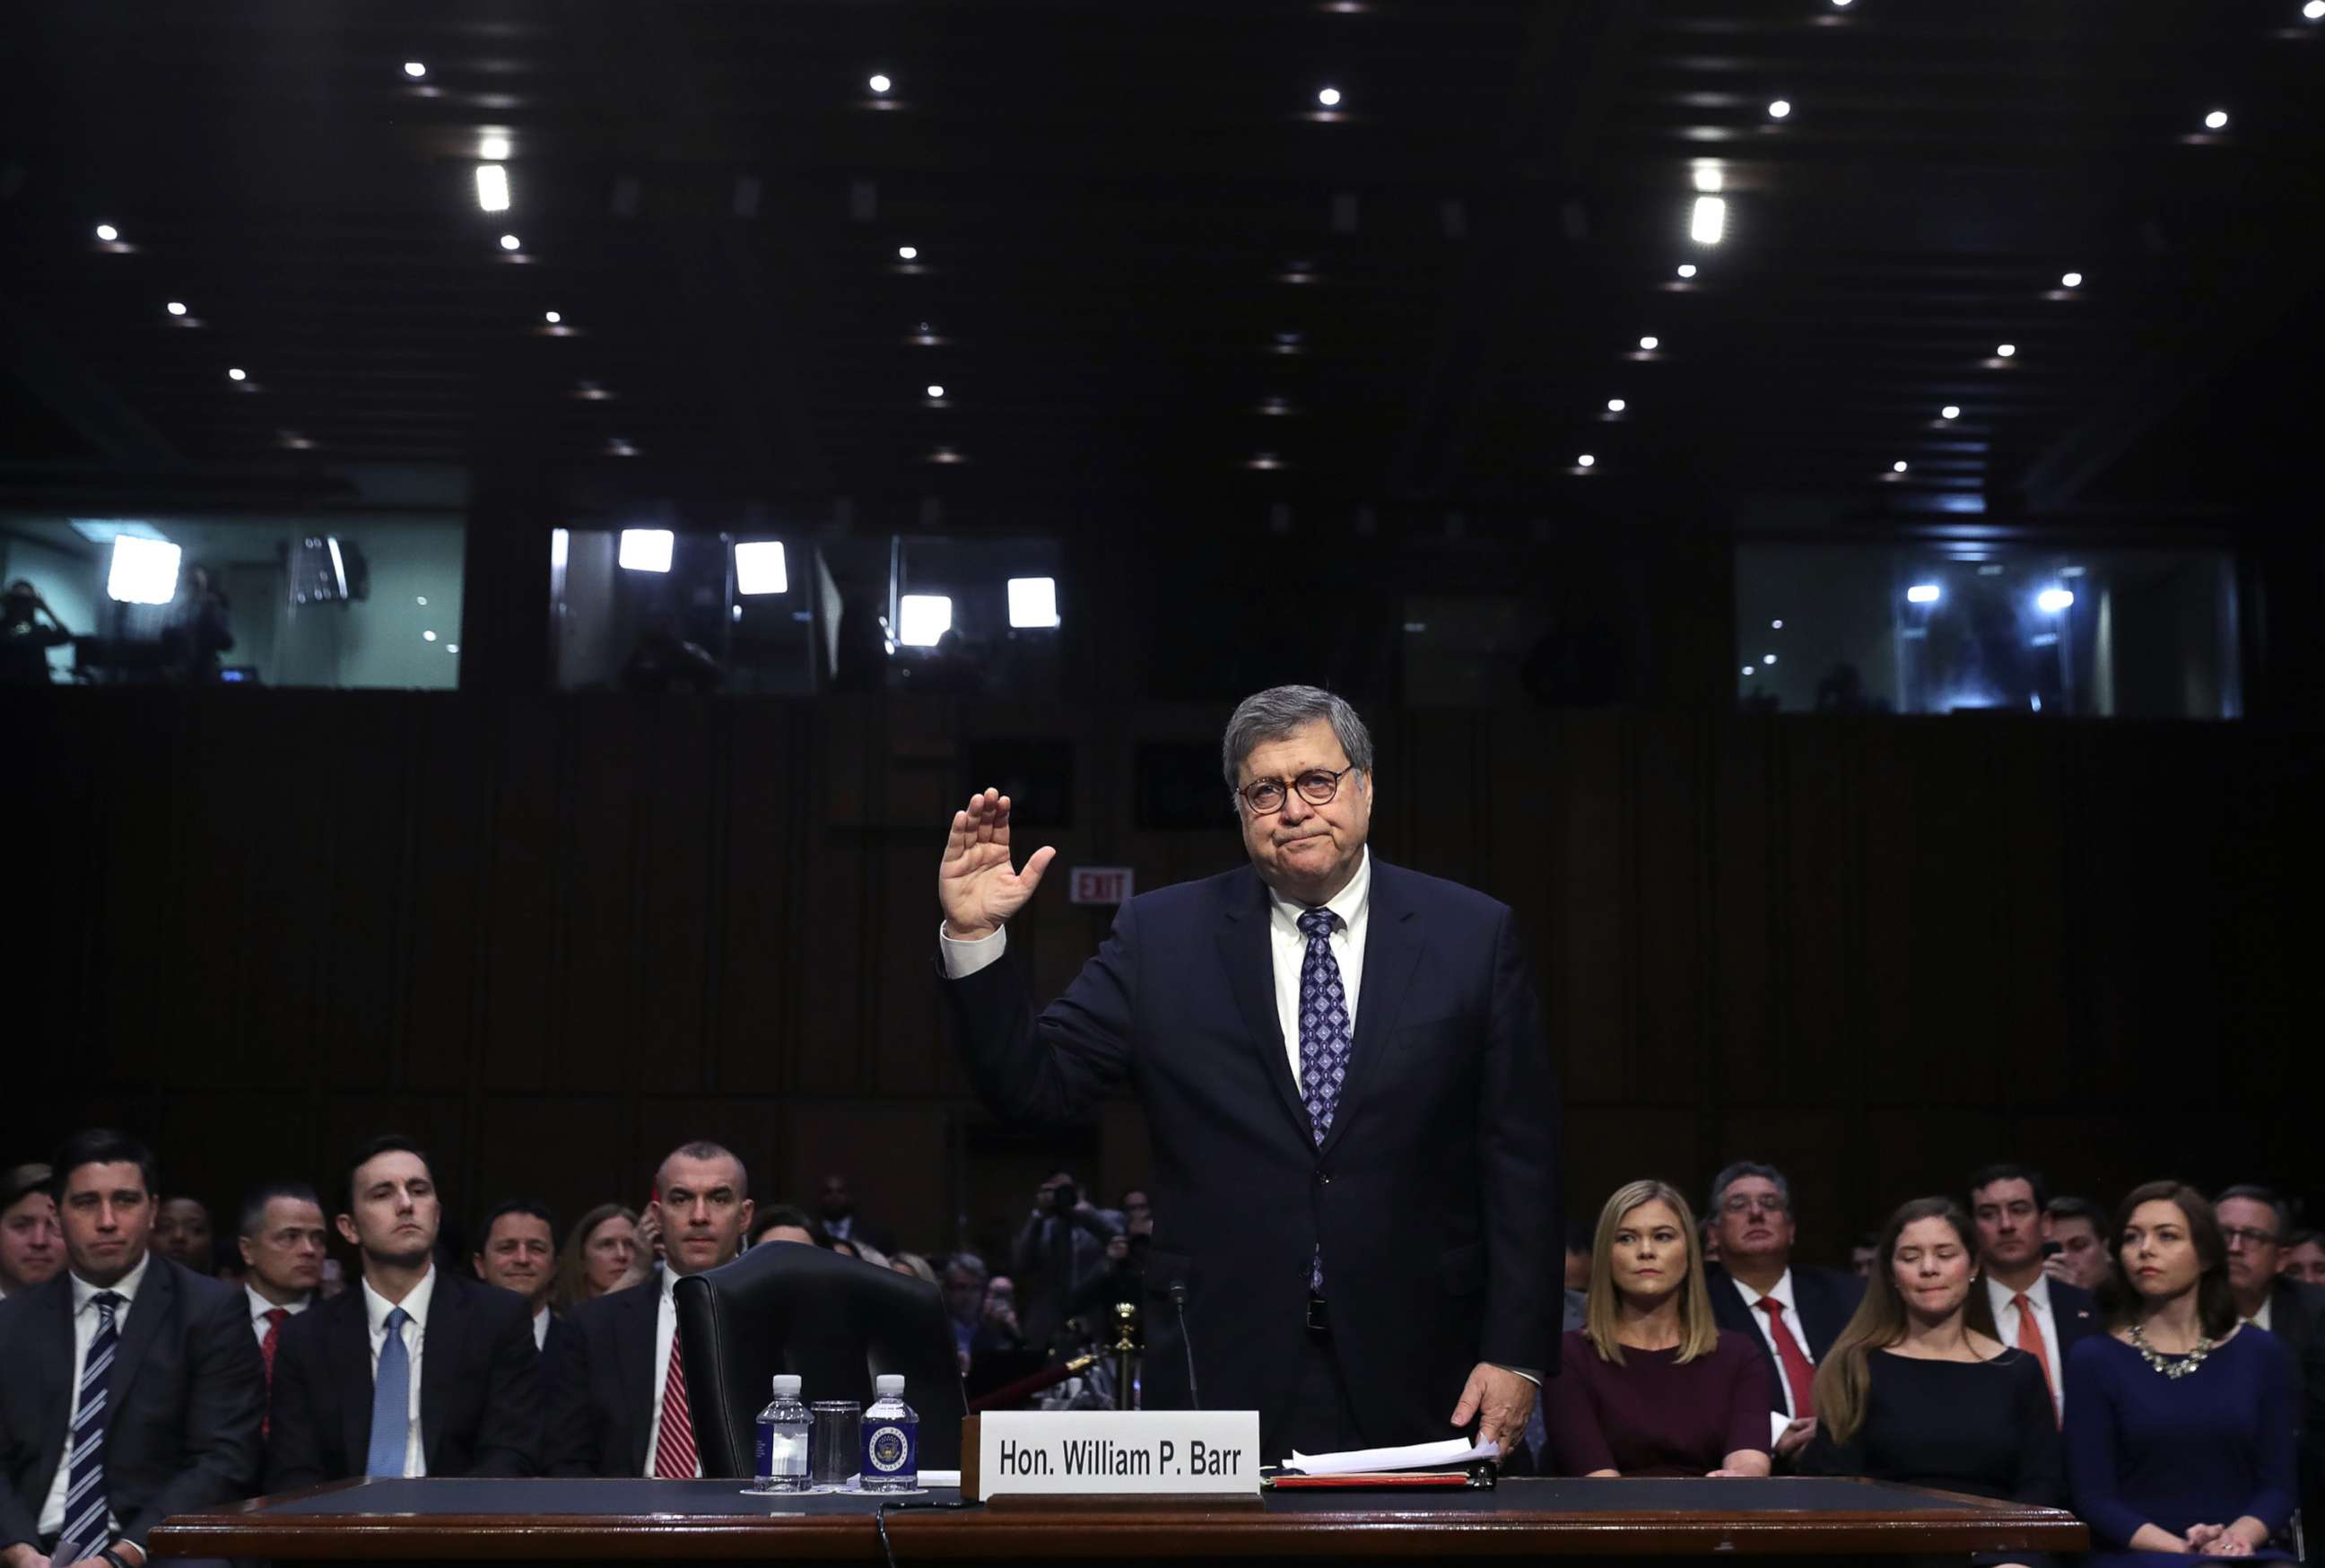 PHOTO: Attorney General nominee William Barr is sworn in prior to testifying at his confirmation hearing before the Senate Judiciary Committee, Jan. 15, 2019, in Washington, D.C.